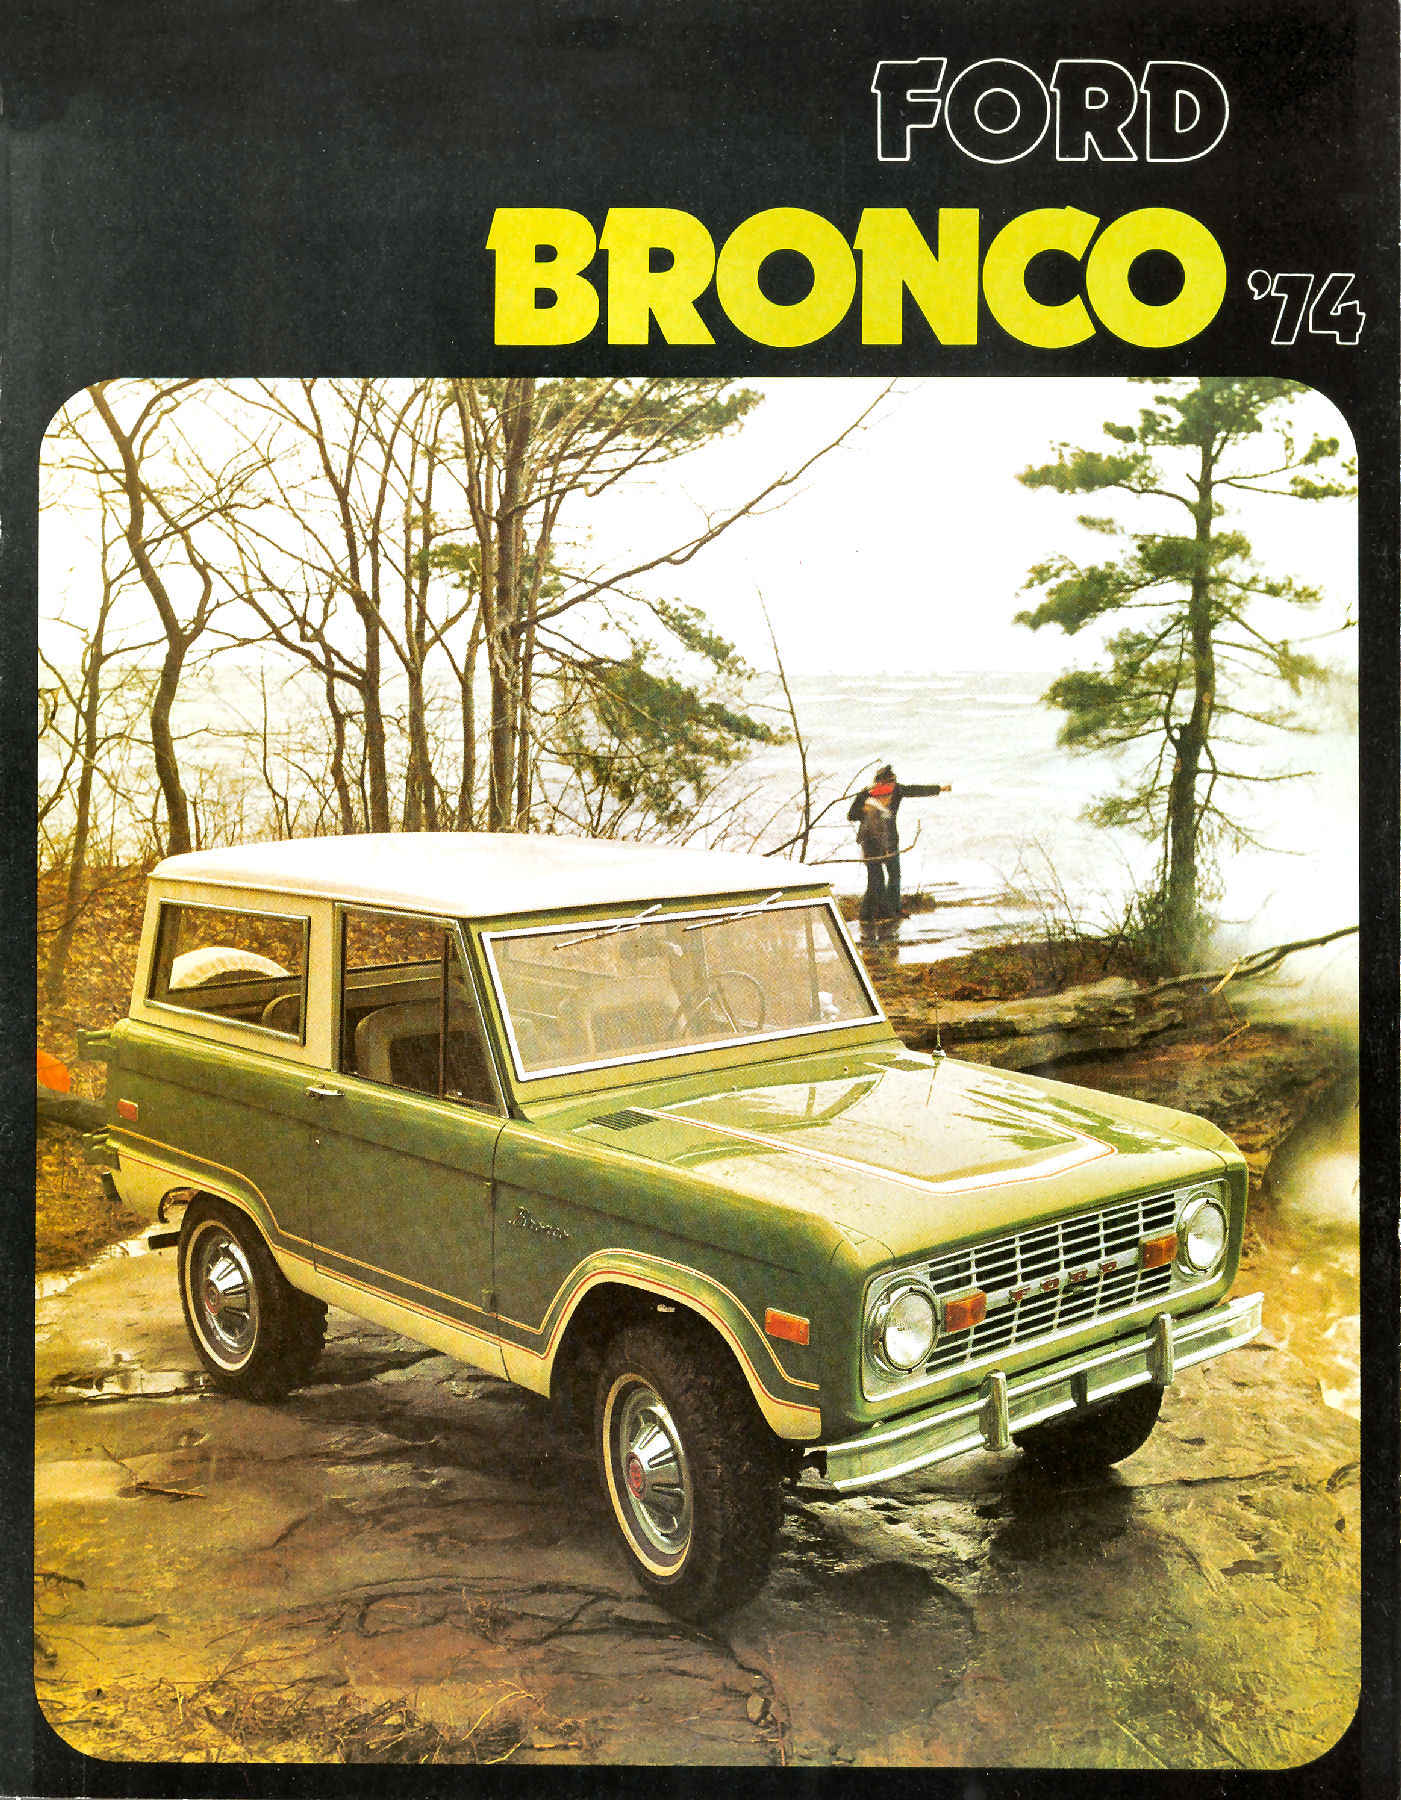 1974 Ford Bronco-01